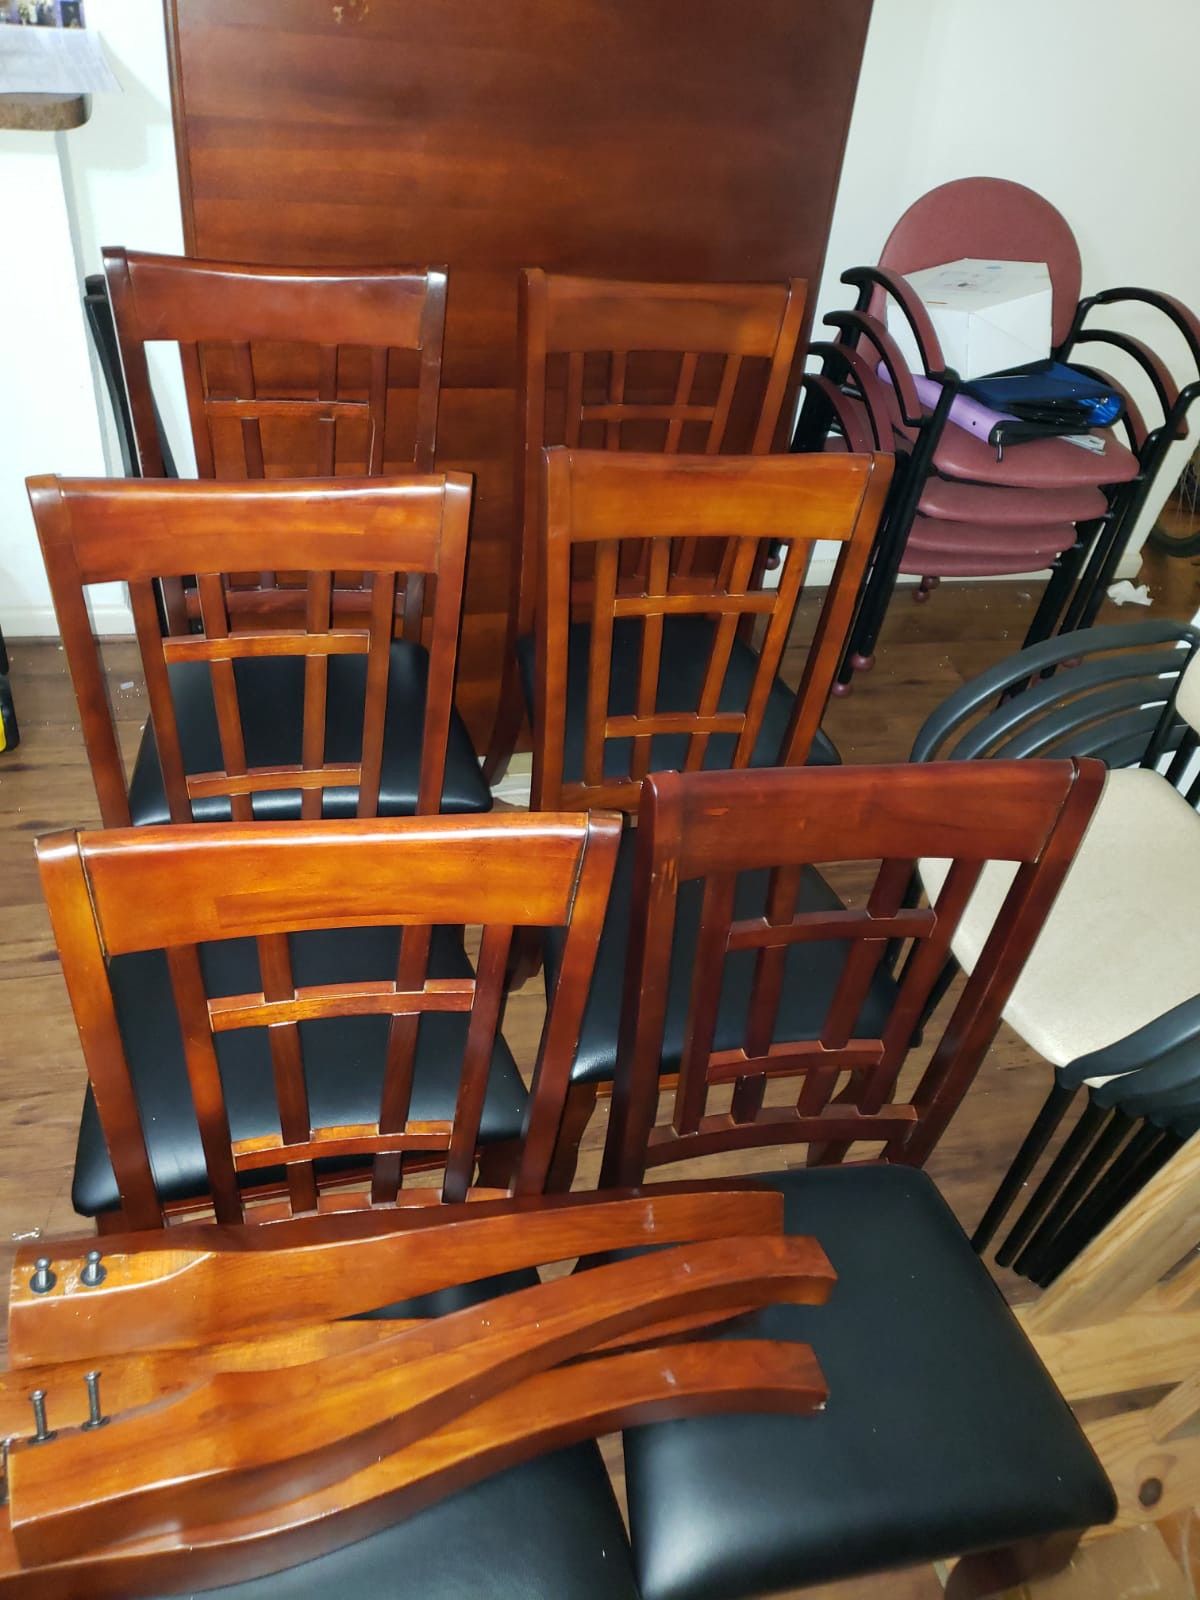 Newhouse by coaster dining table with 6 chairs. Comedor coaster newhouse con 6 sillas.